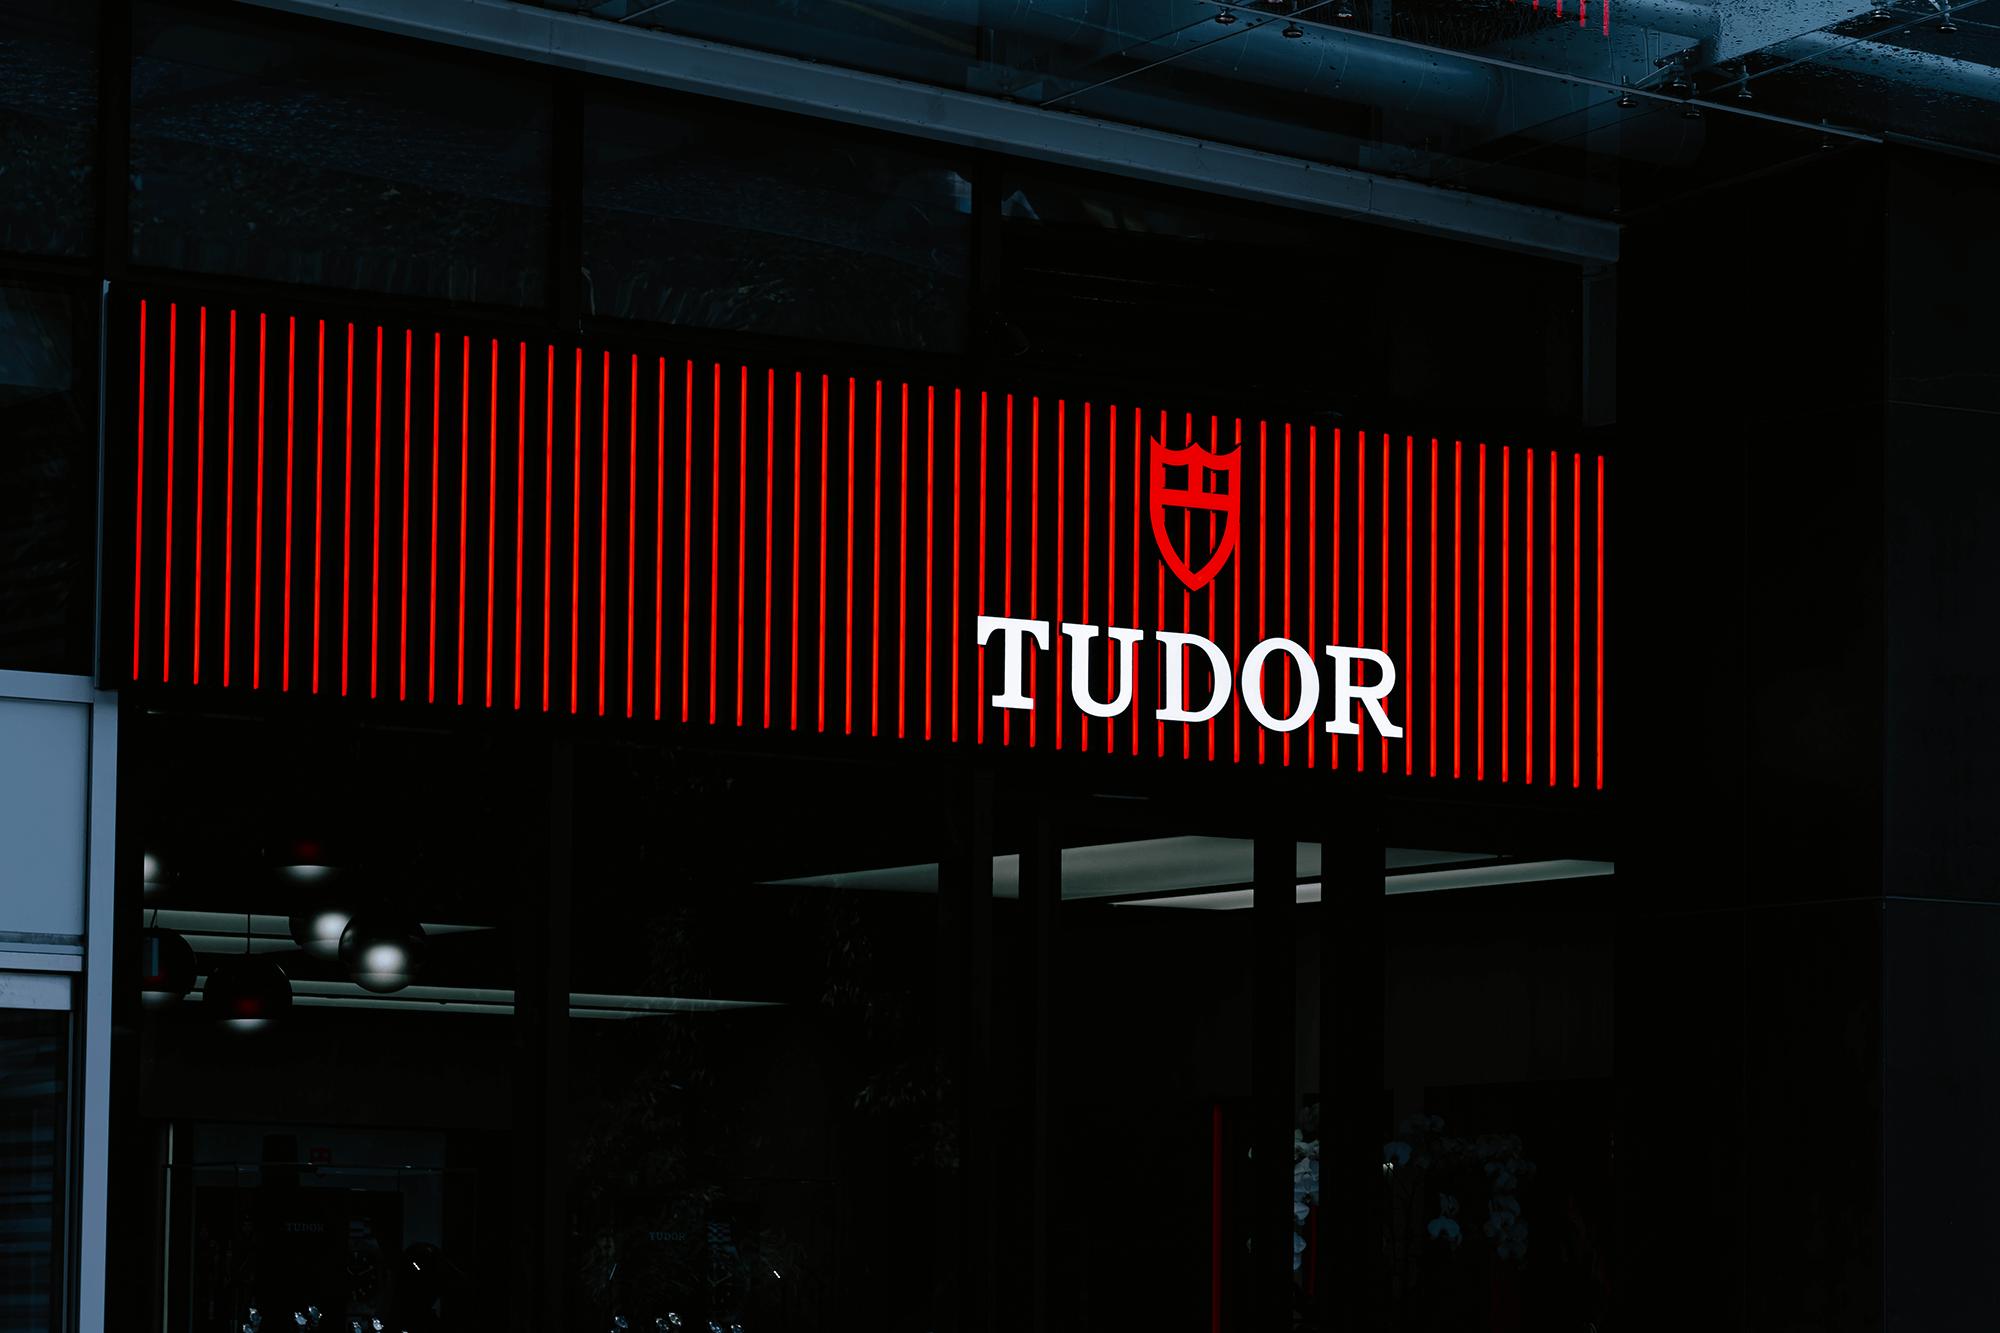 Illuminated red and white "TUDOR" sign with logo on a building facade at night.